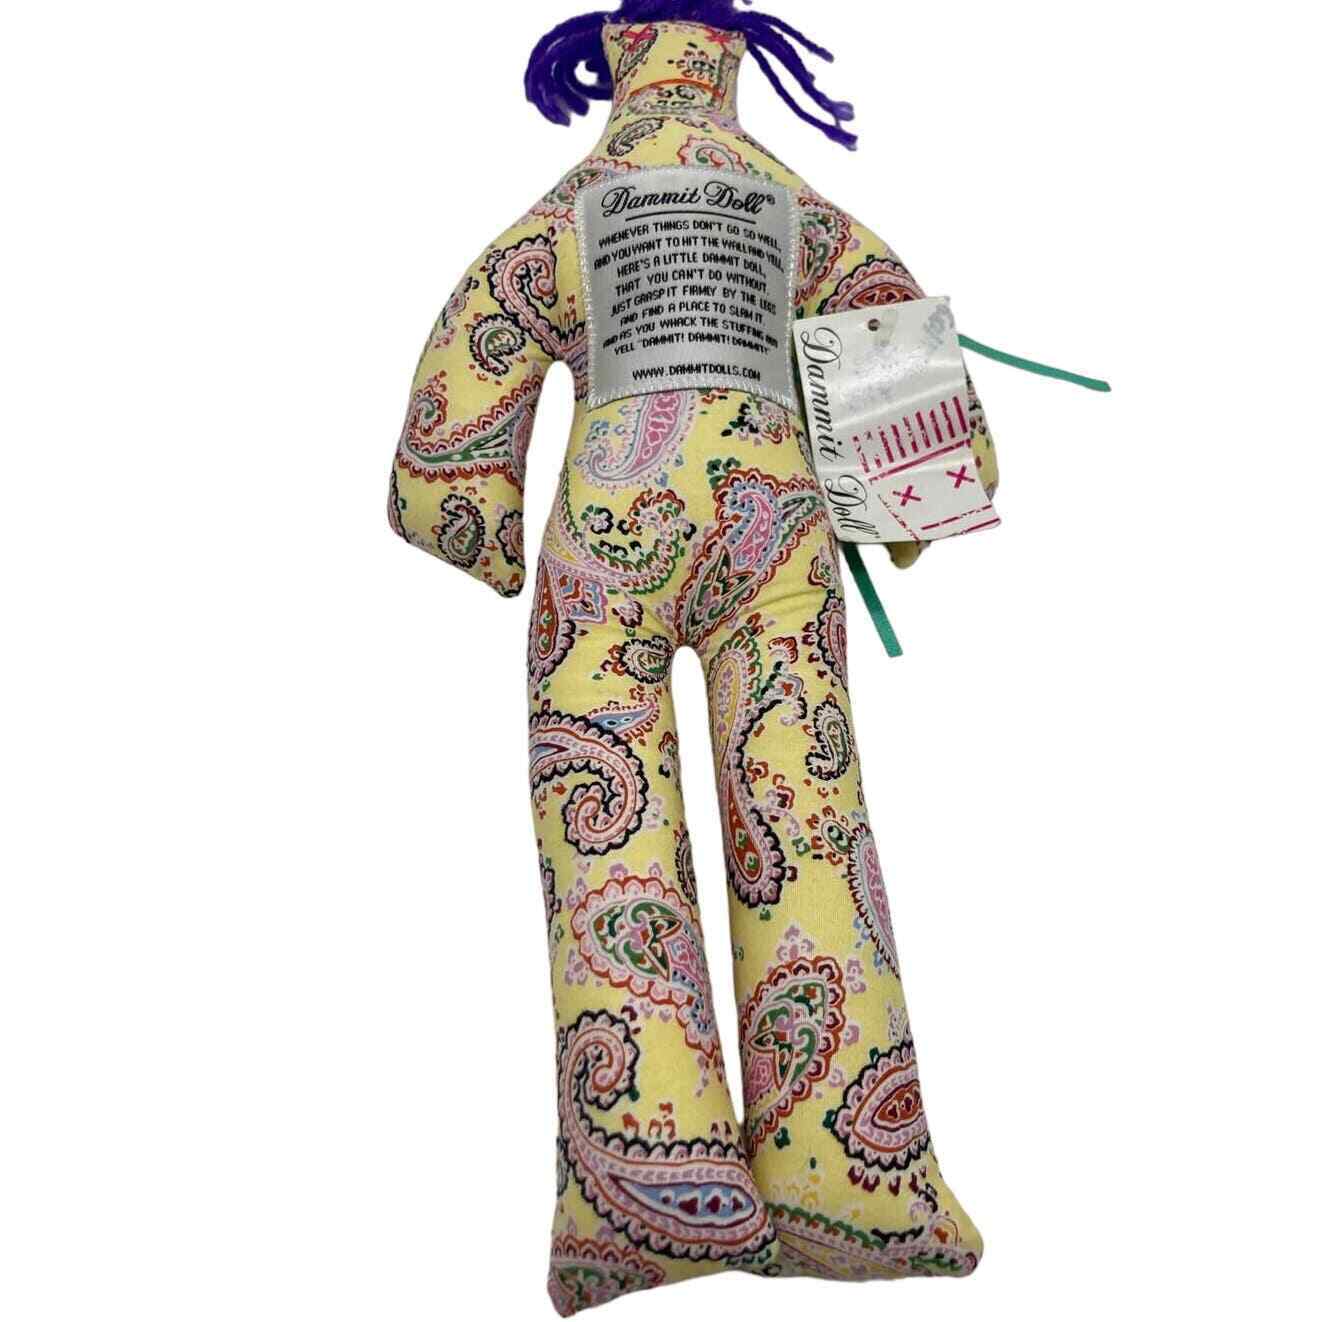 Dammit Doll Stress Relief Anger Gag Gift Voodoo Paisley Fabric